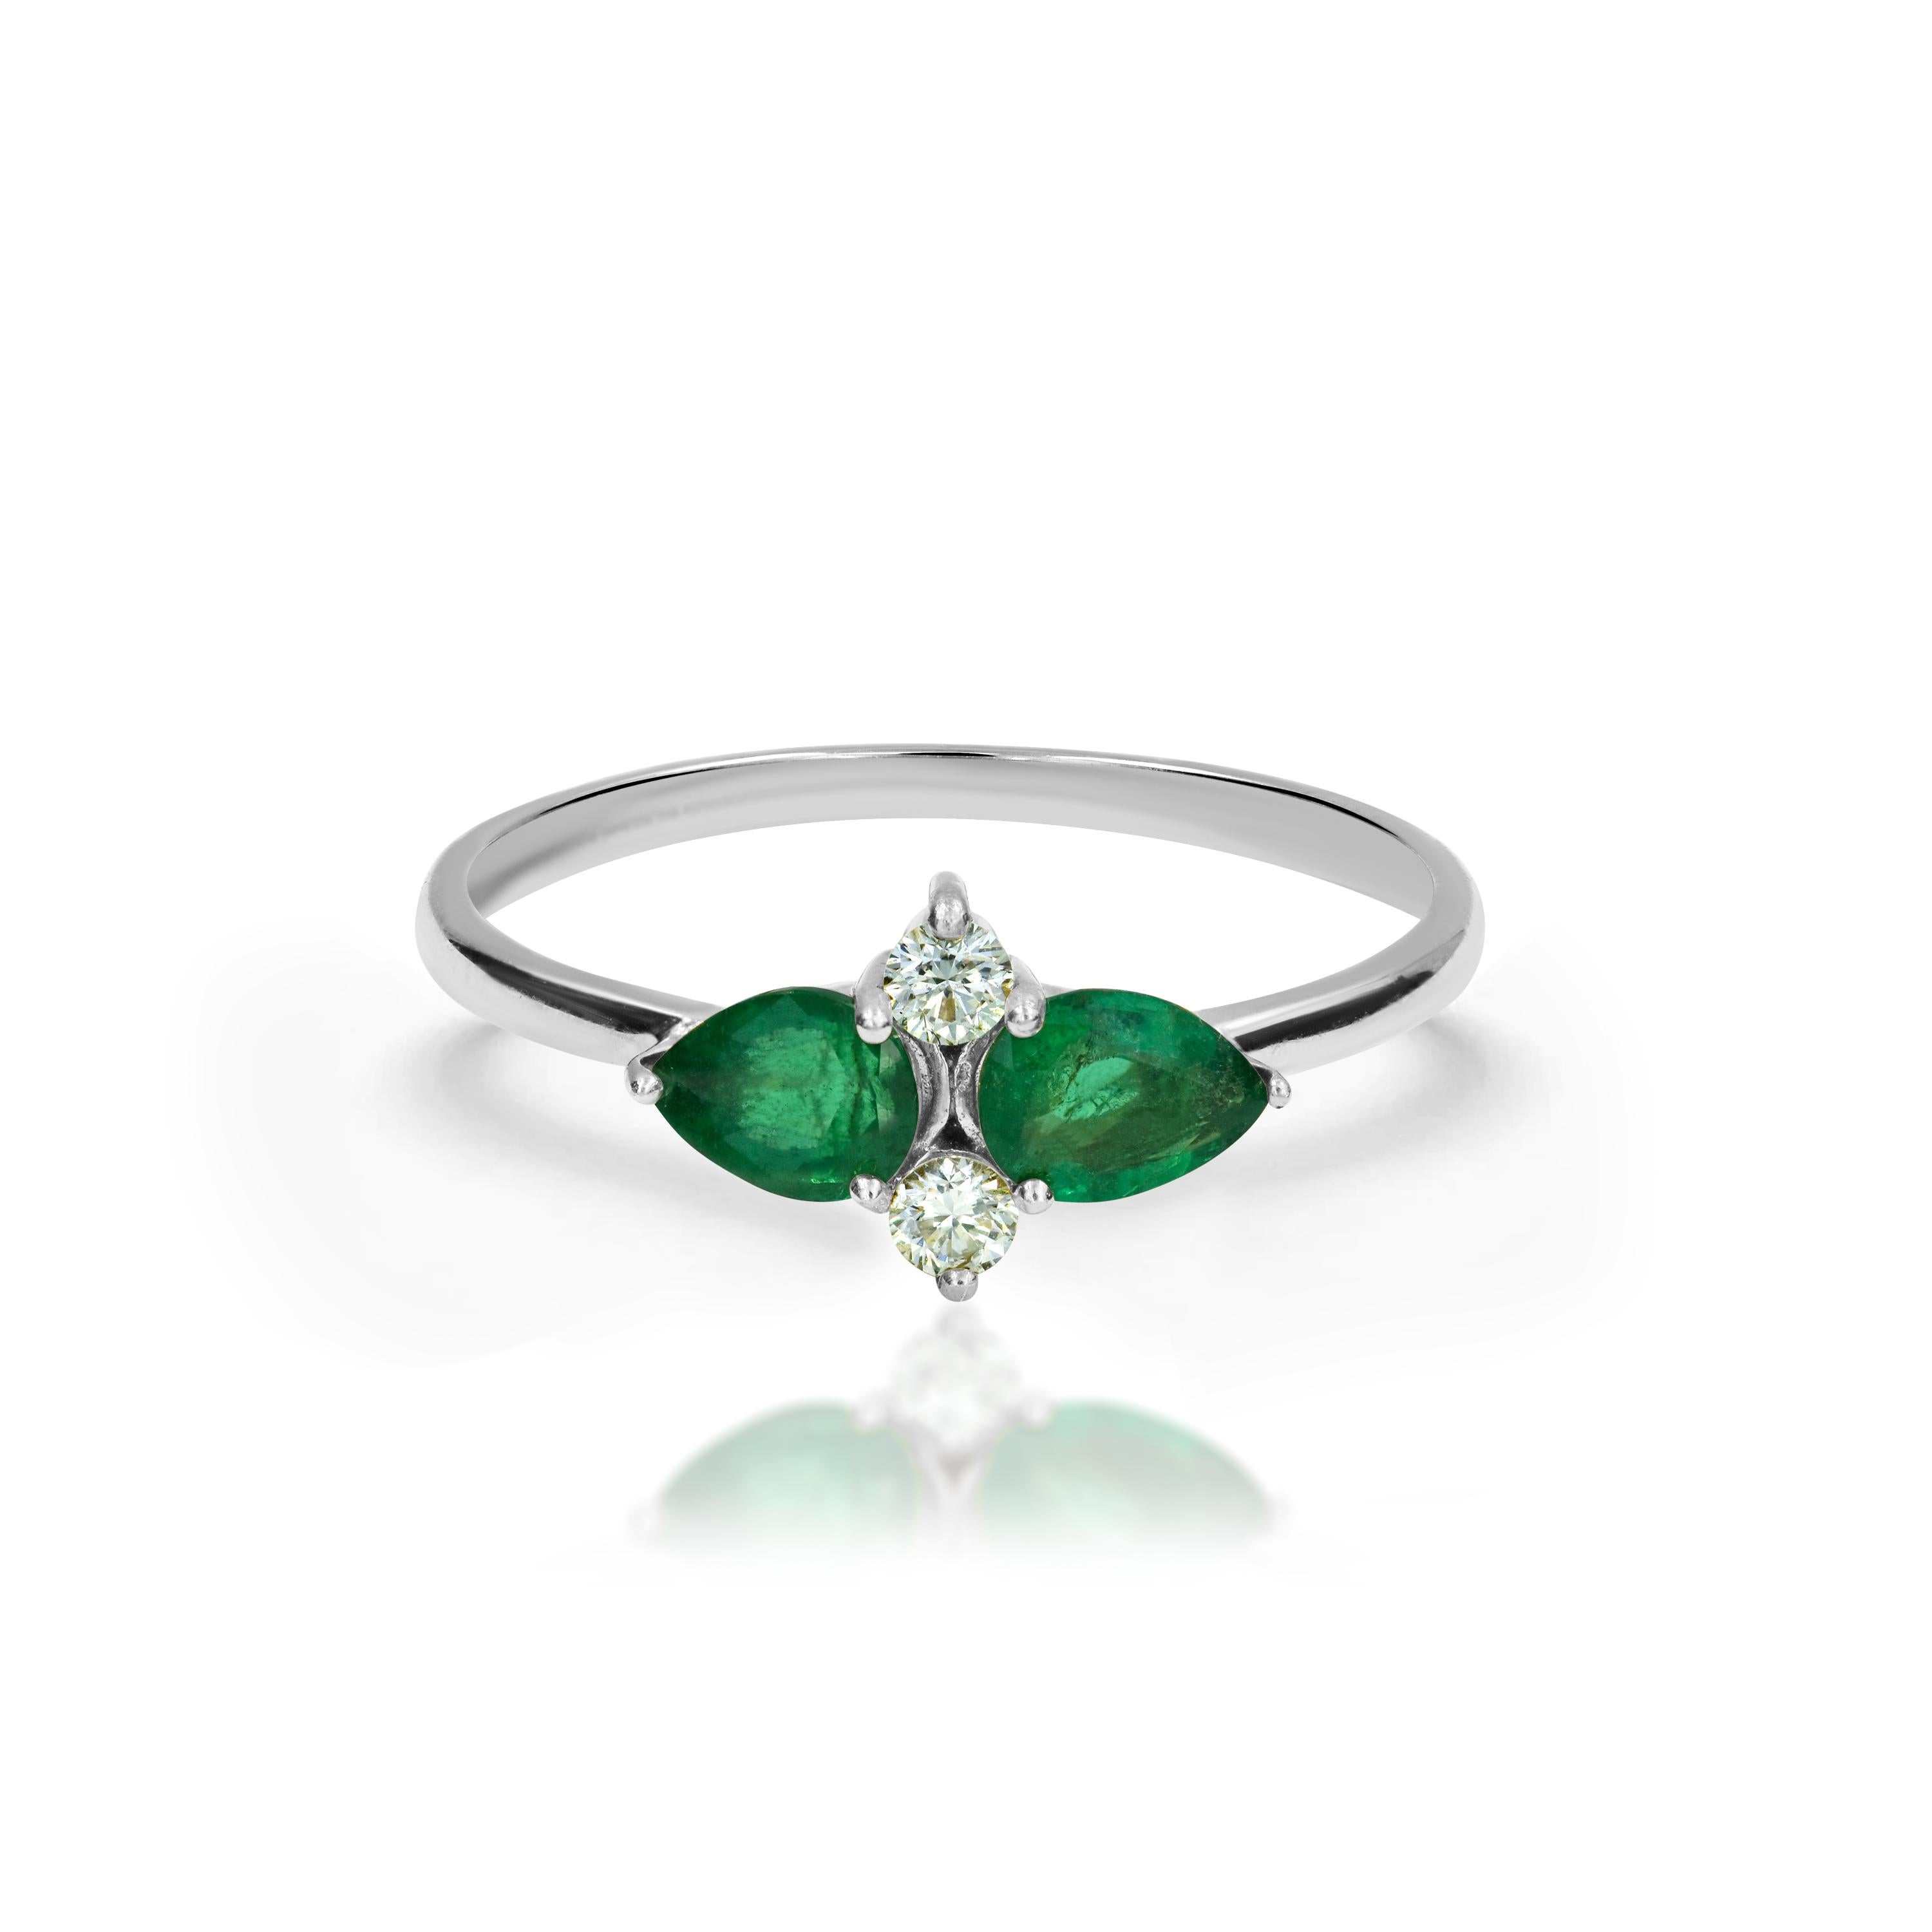 For Sale:  14k Gold Pear Shape 0.56 Carat Emerald and Diamond Engagement Ring 4